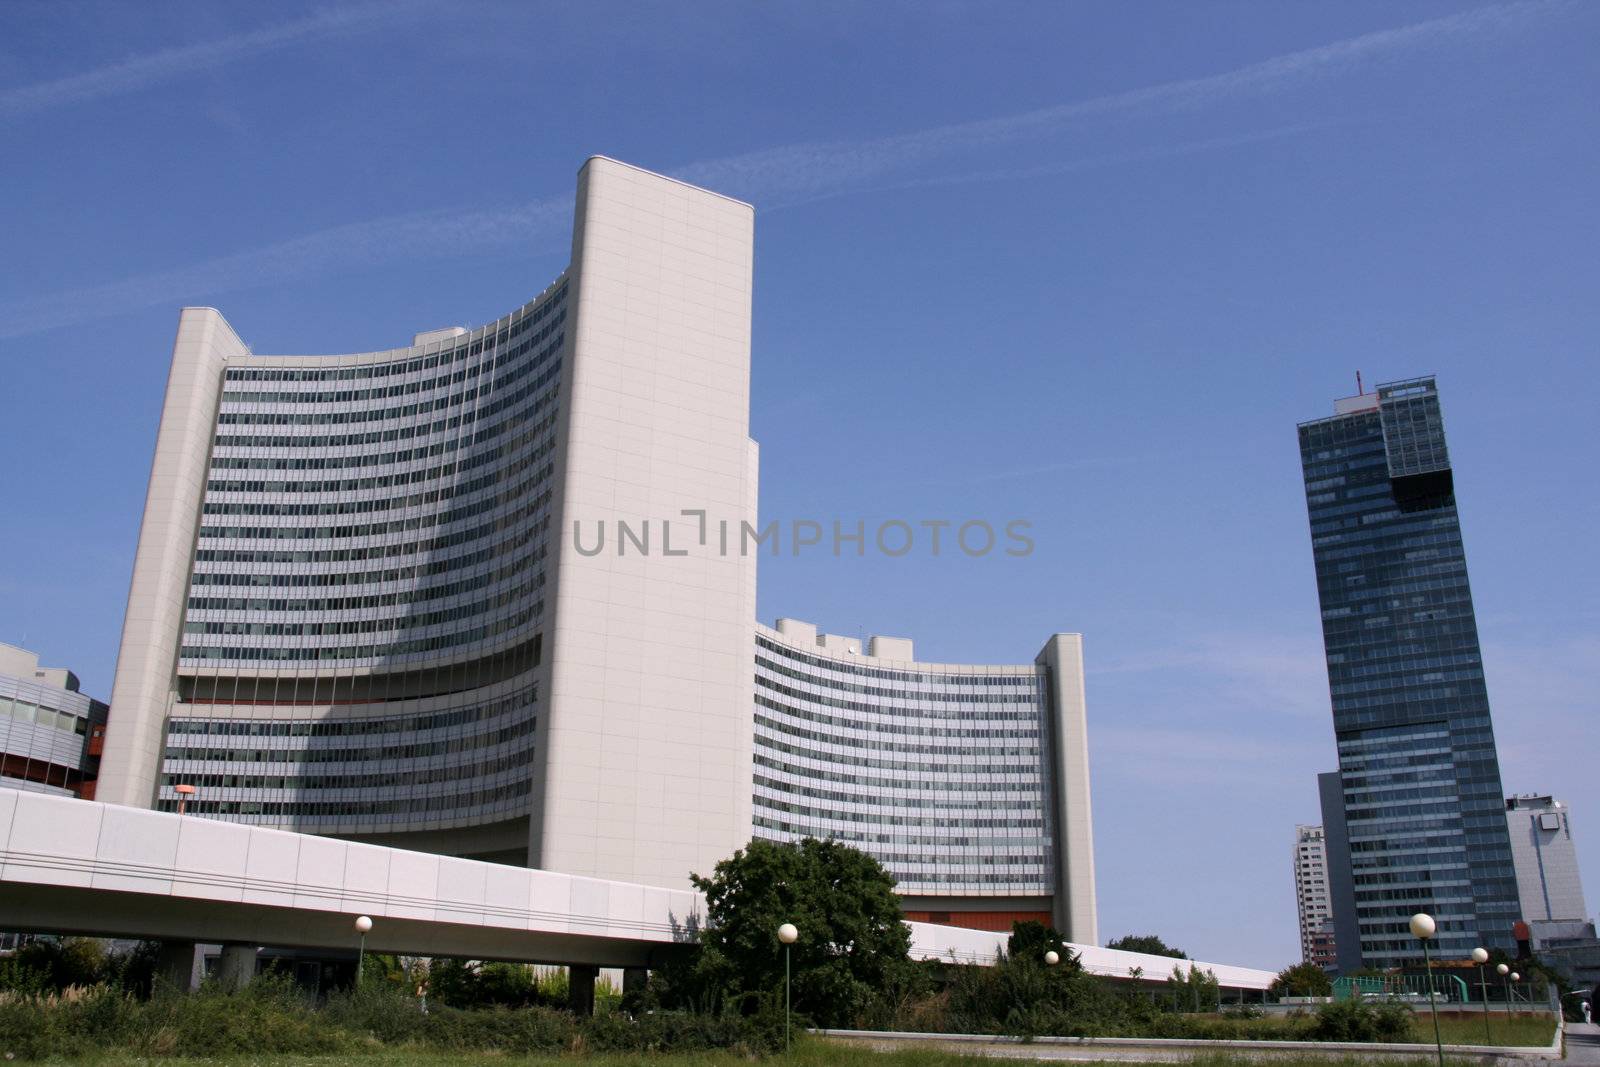 Vienna modern building - famous landmark. UNO City - VIC, Vienna International Centre. It is an extraterritorial area. It hosts United Nations (UN), International Atomic Energy Agency (IAEA), United Nations Office on Drugs and Crime (UNODC), Office for Outer Space Affairs (OOSA), United Nations Industrial Development Organization (UNIDO).